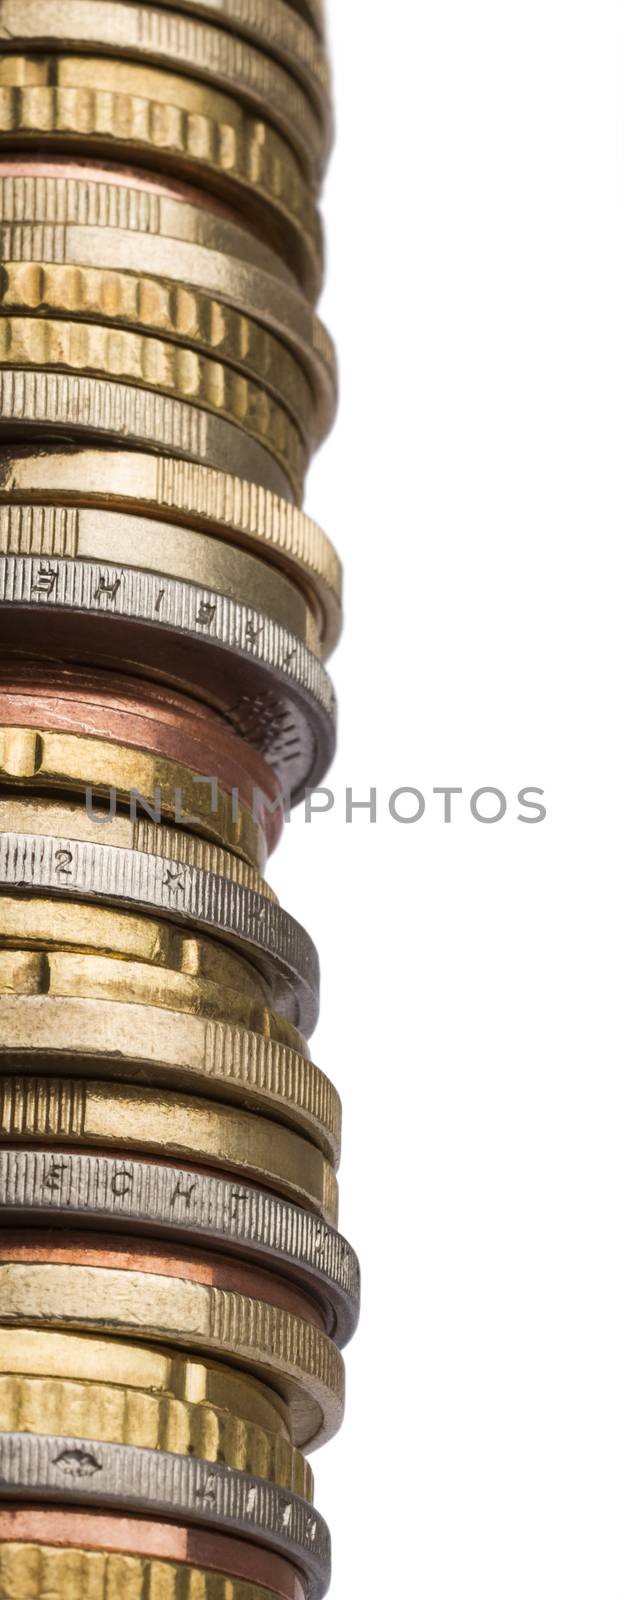 huge tower of different euro coins in close up shot isolated in white background